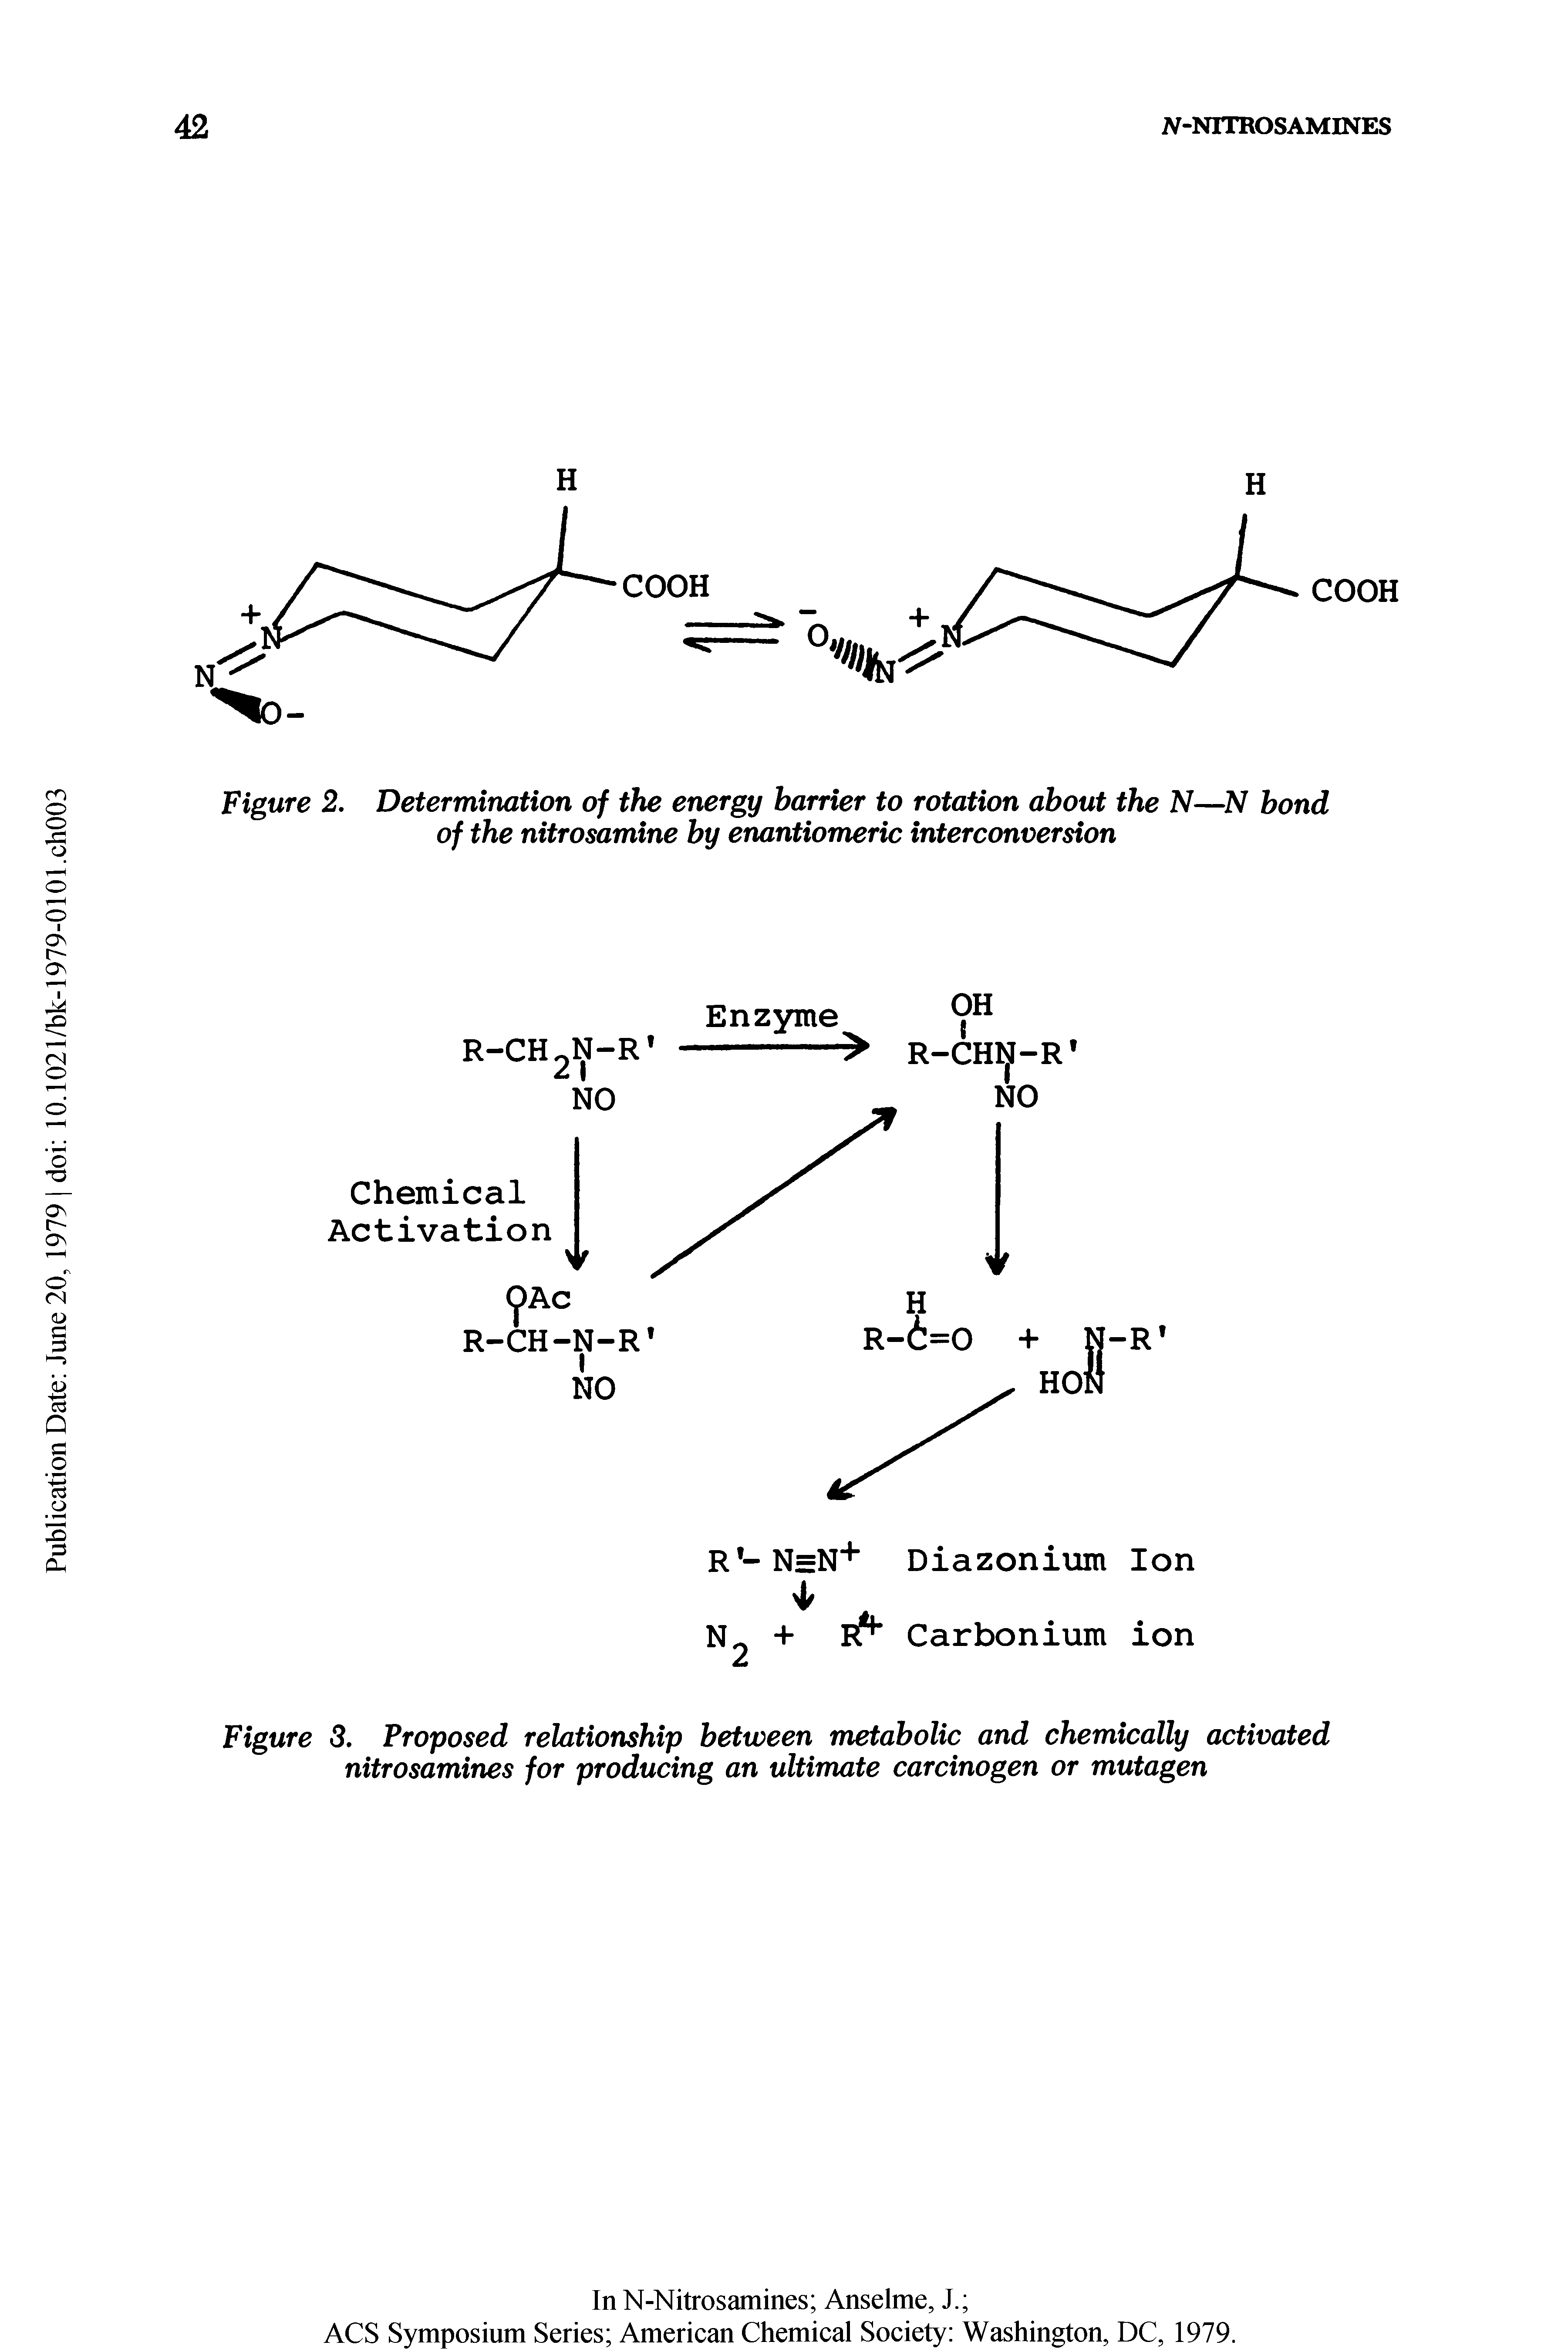 Figure 2. Determination of the energy barrier to rotation about the N—N bond of the nitrosamine by enantiomeric interconversion...